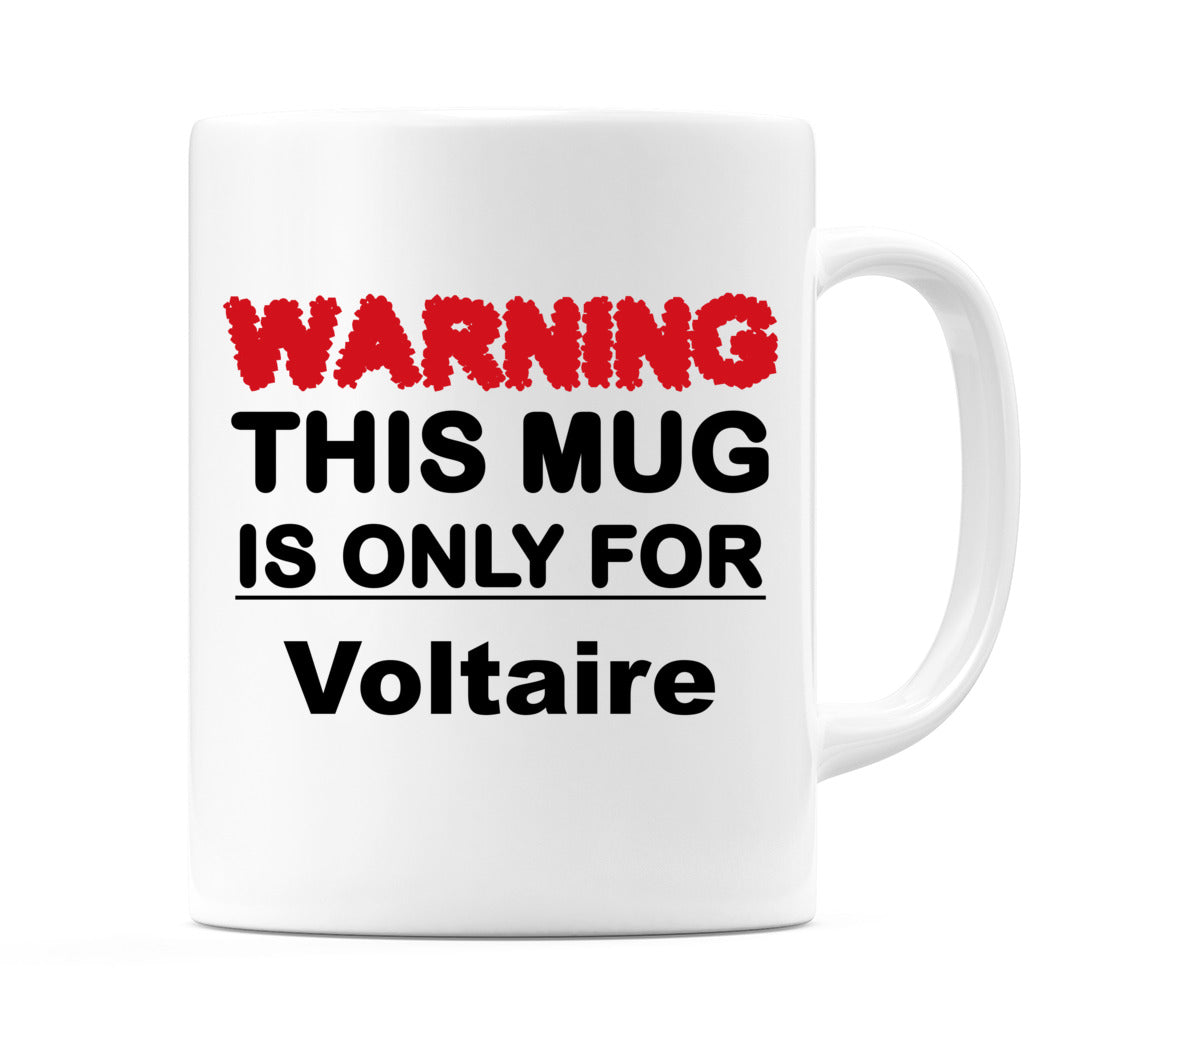 Warning This Mug is ONLY for Voltaire Mug